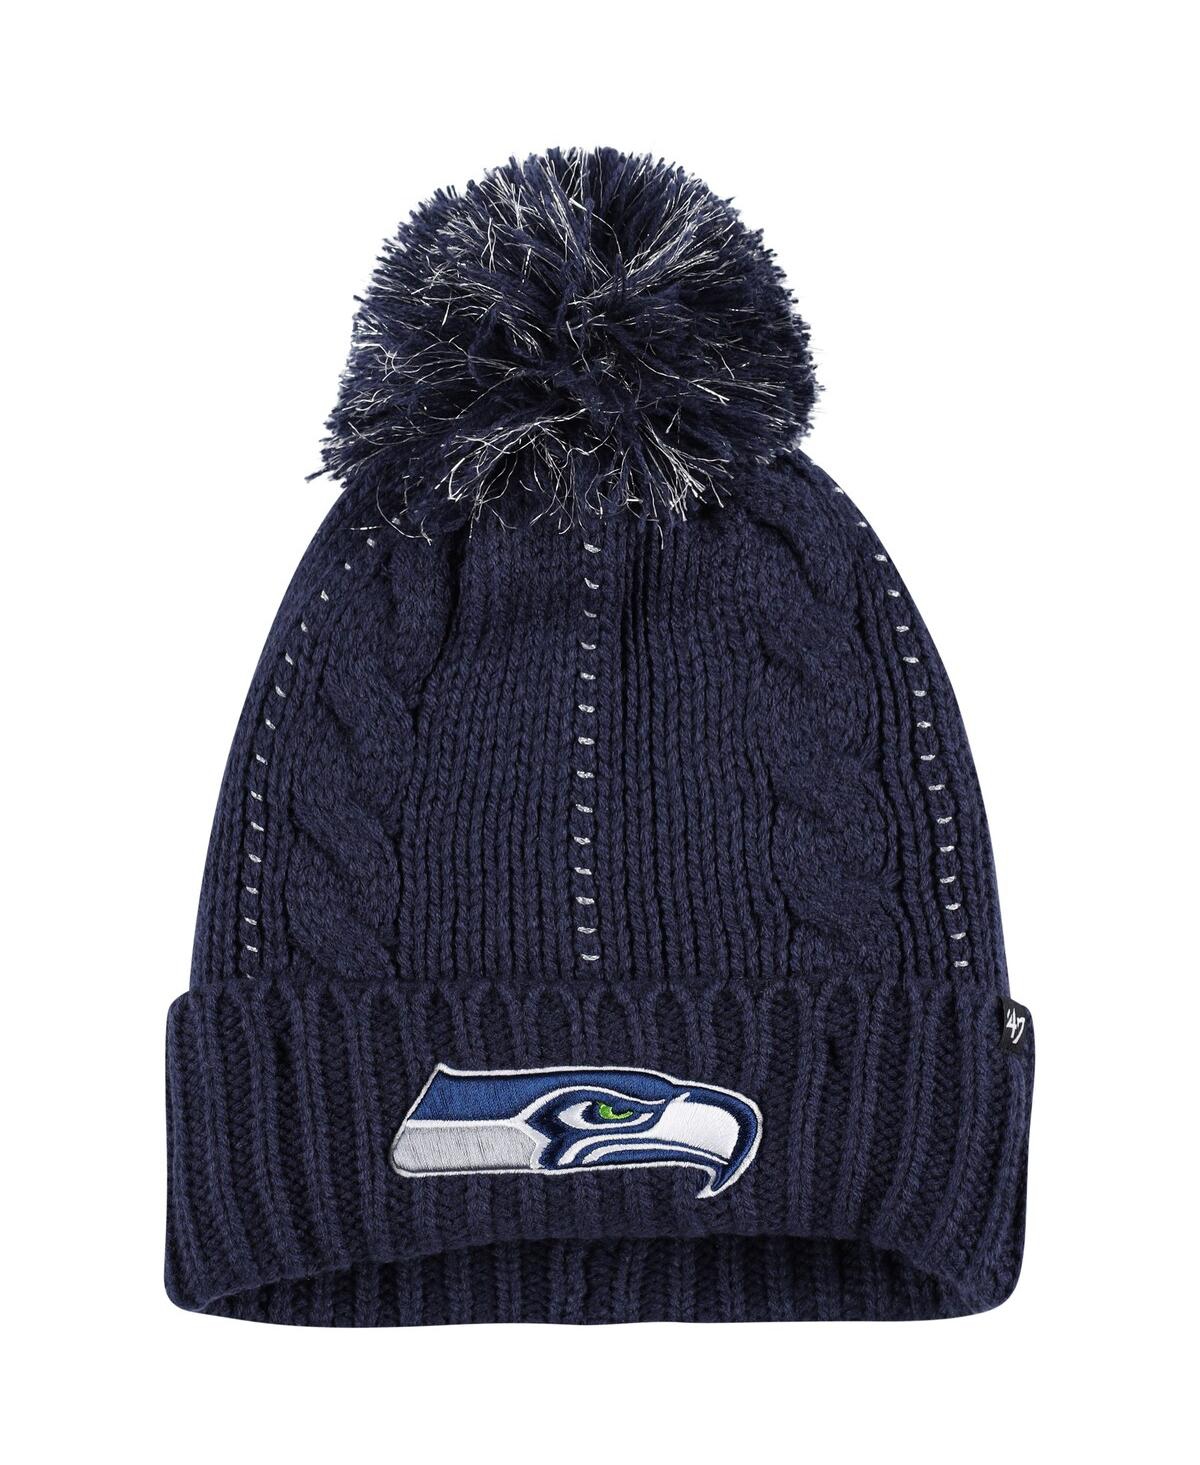 47 Brand Women's ' College Navy Seattle Seahawks Bauble Cuffed Knit Hat With Pom